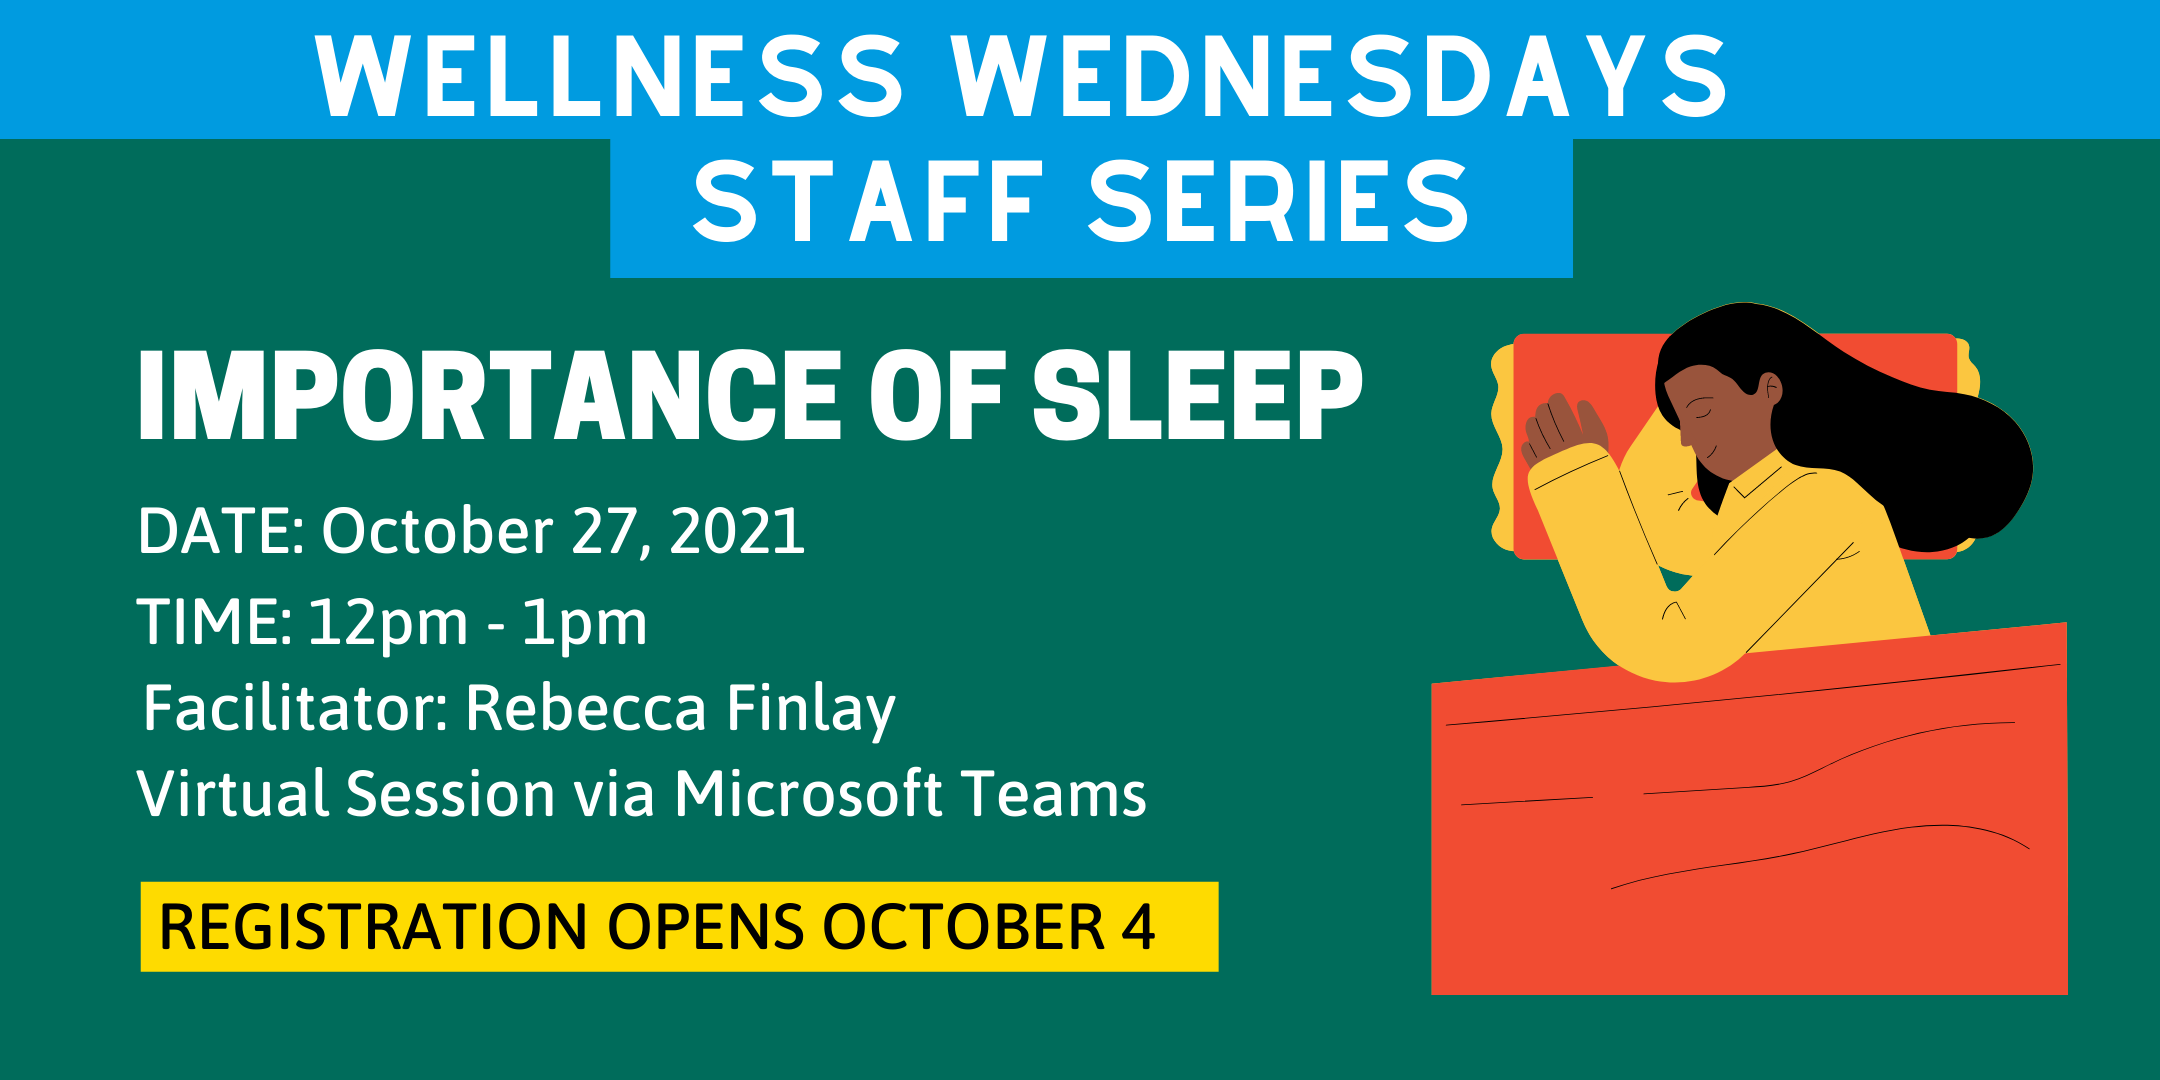 Text about Wellness Wednesday event with graphic of a person lying on their side on a pillow under a blanket 